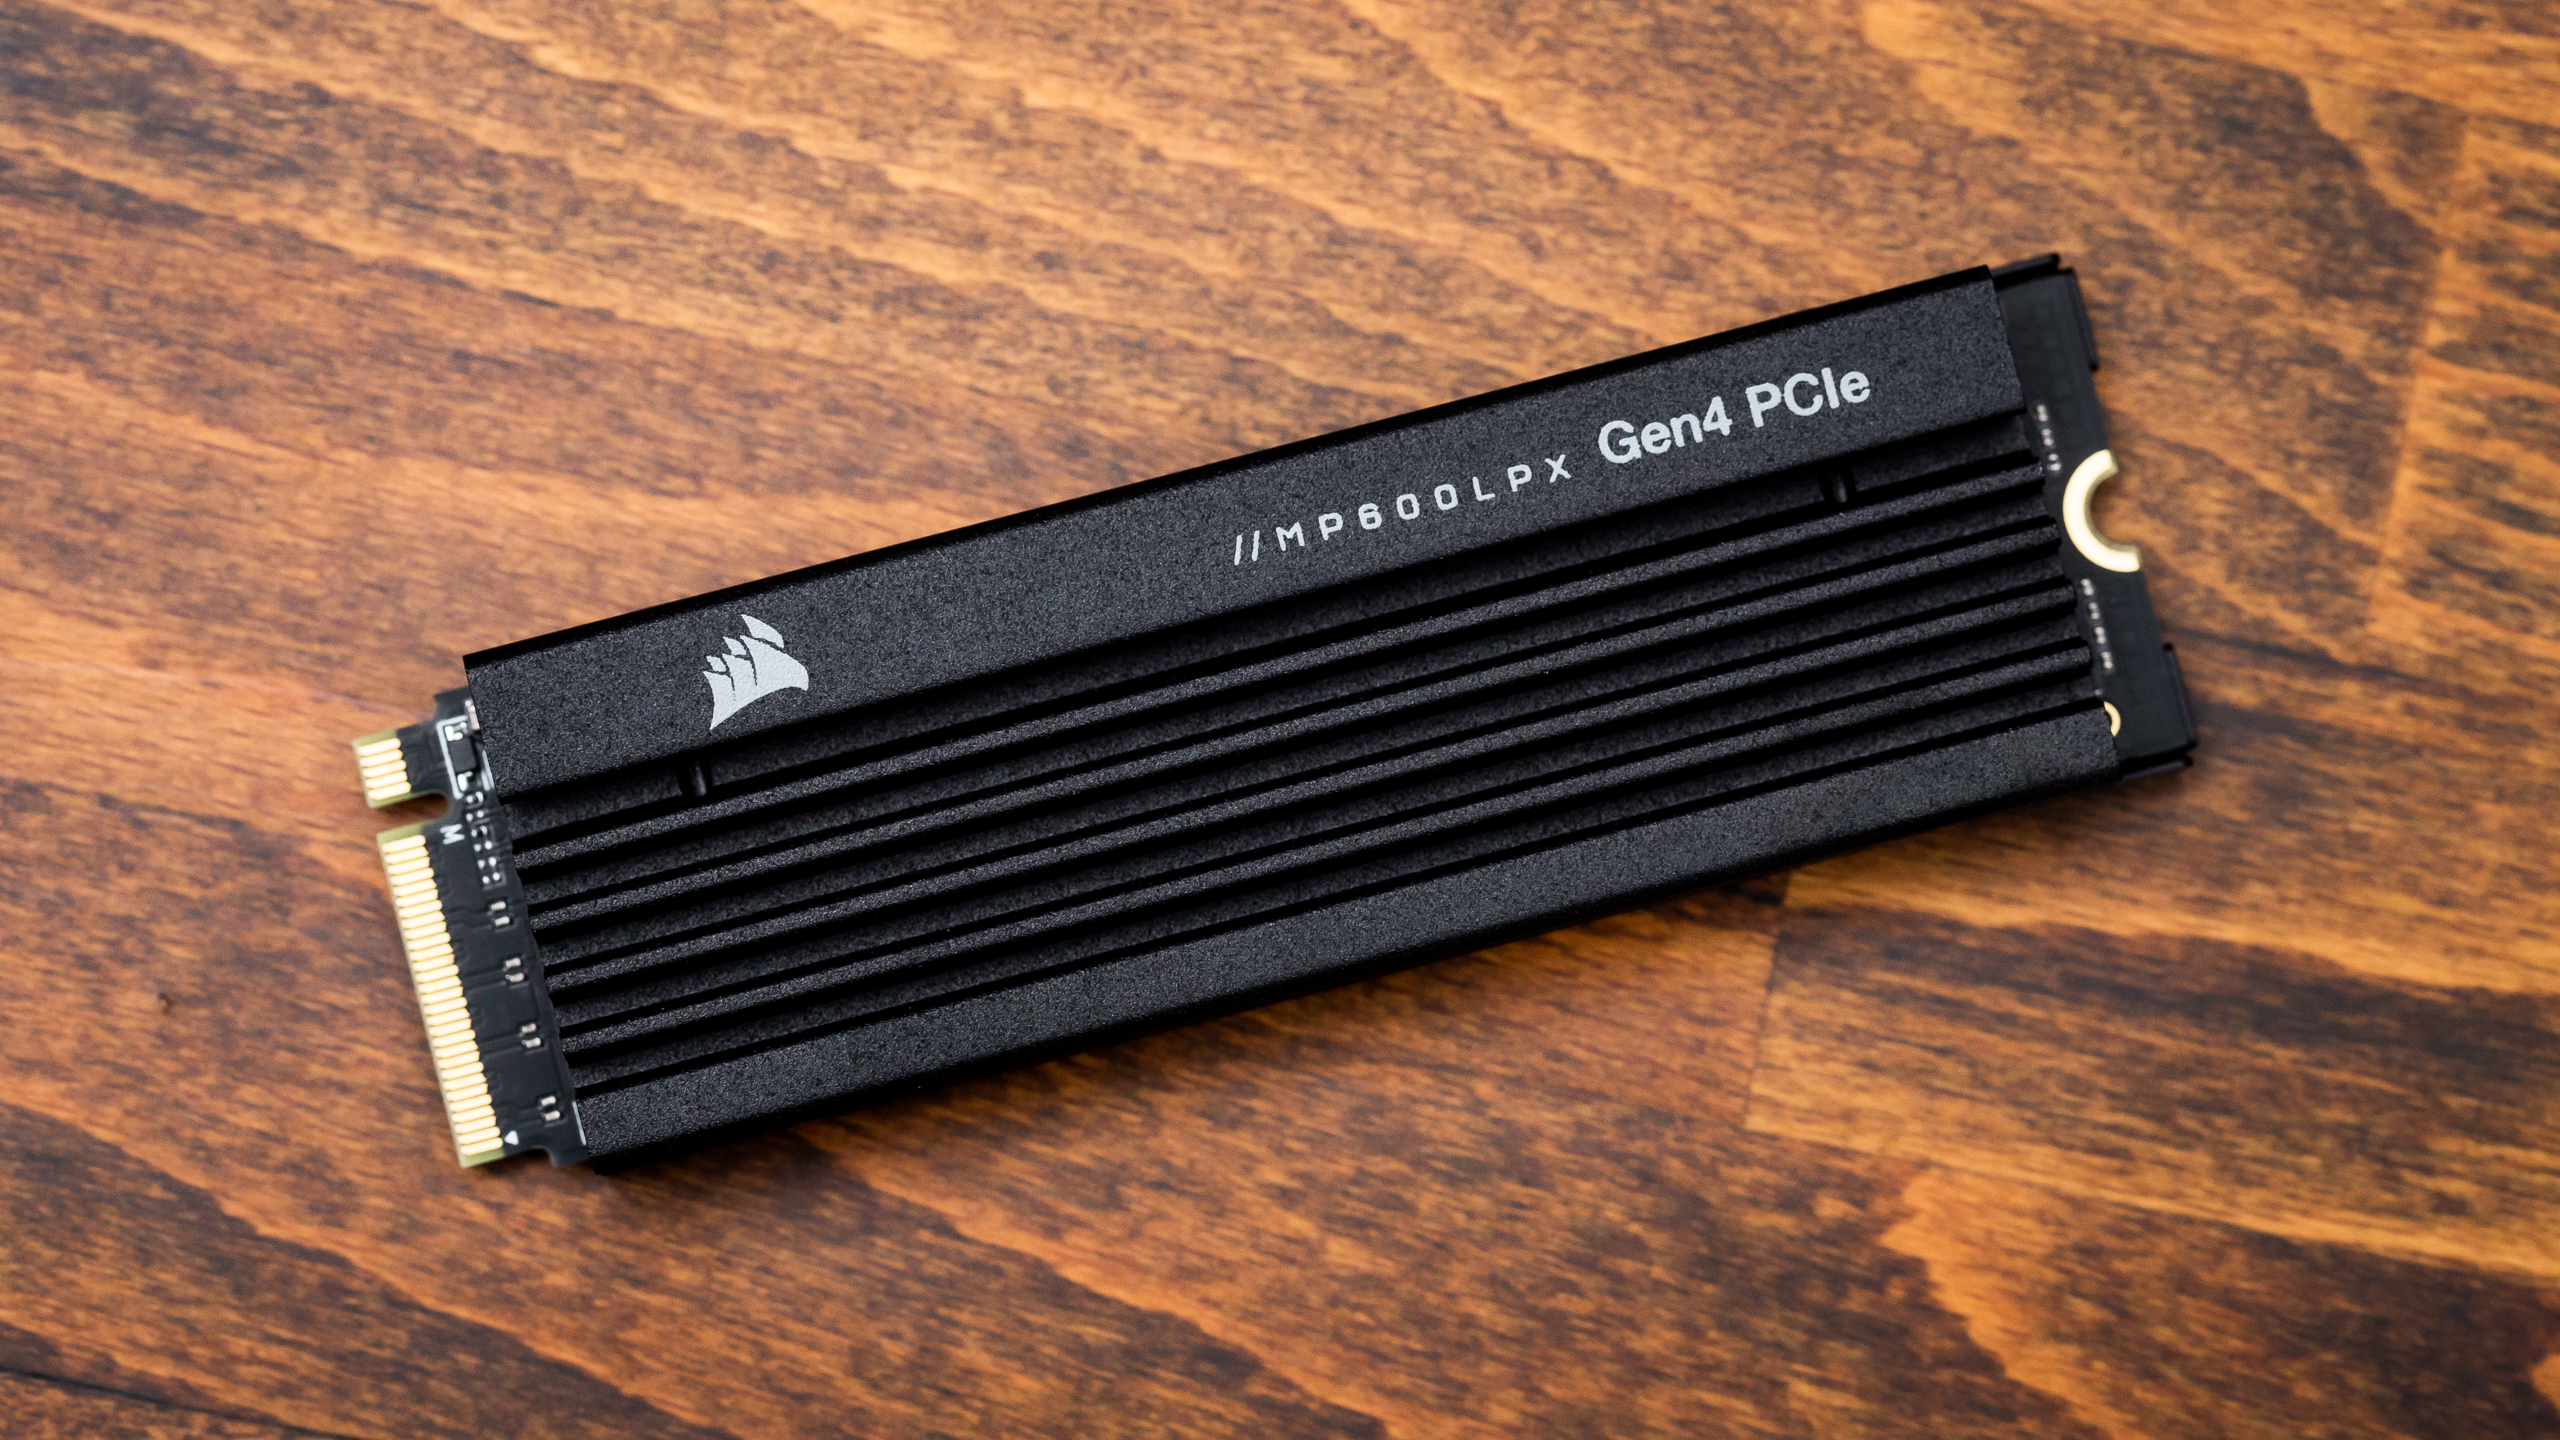 MP600 Pro LPX in review - Corsair's fastest SSD is now also PS5